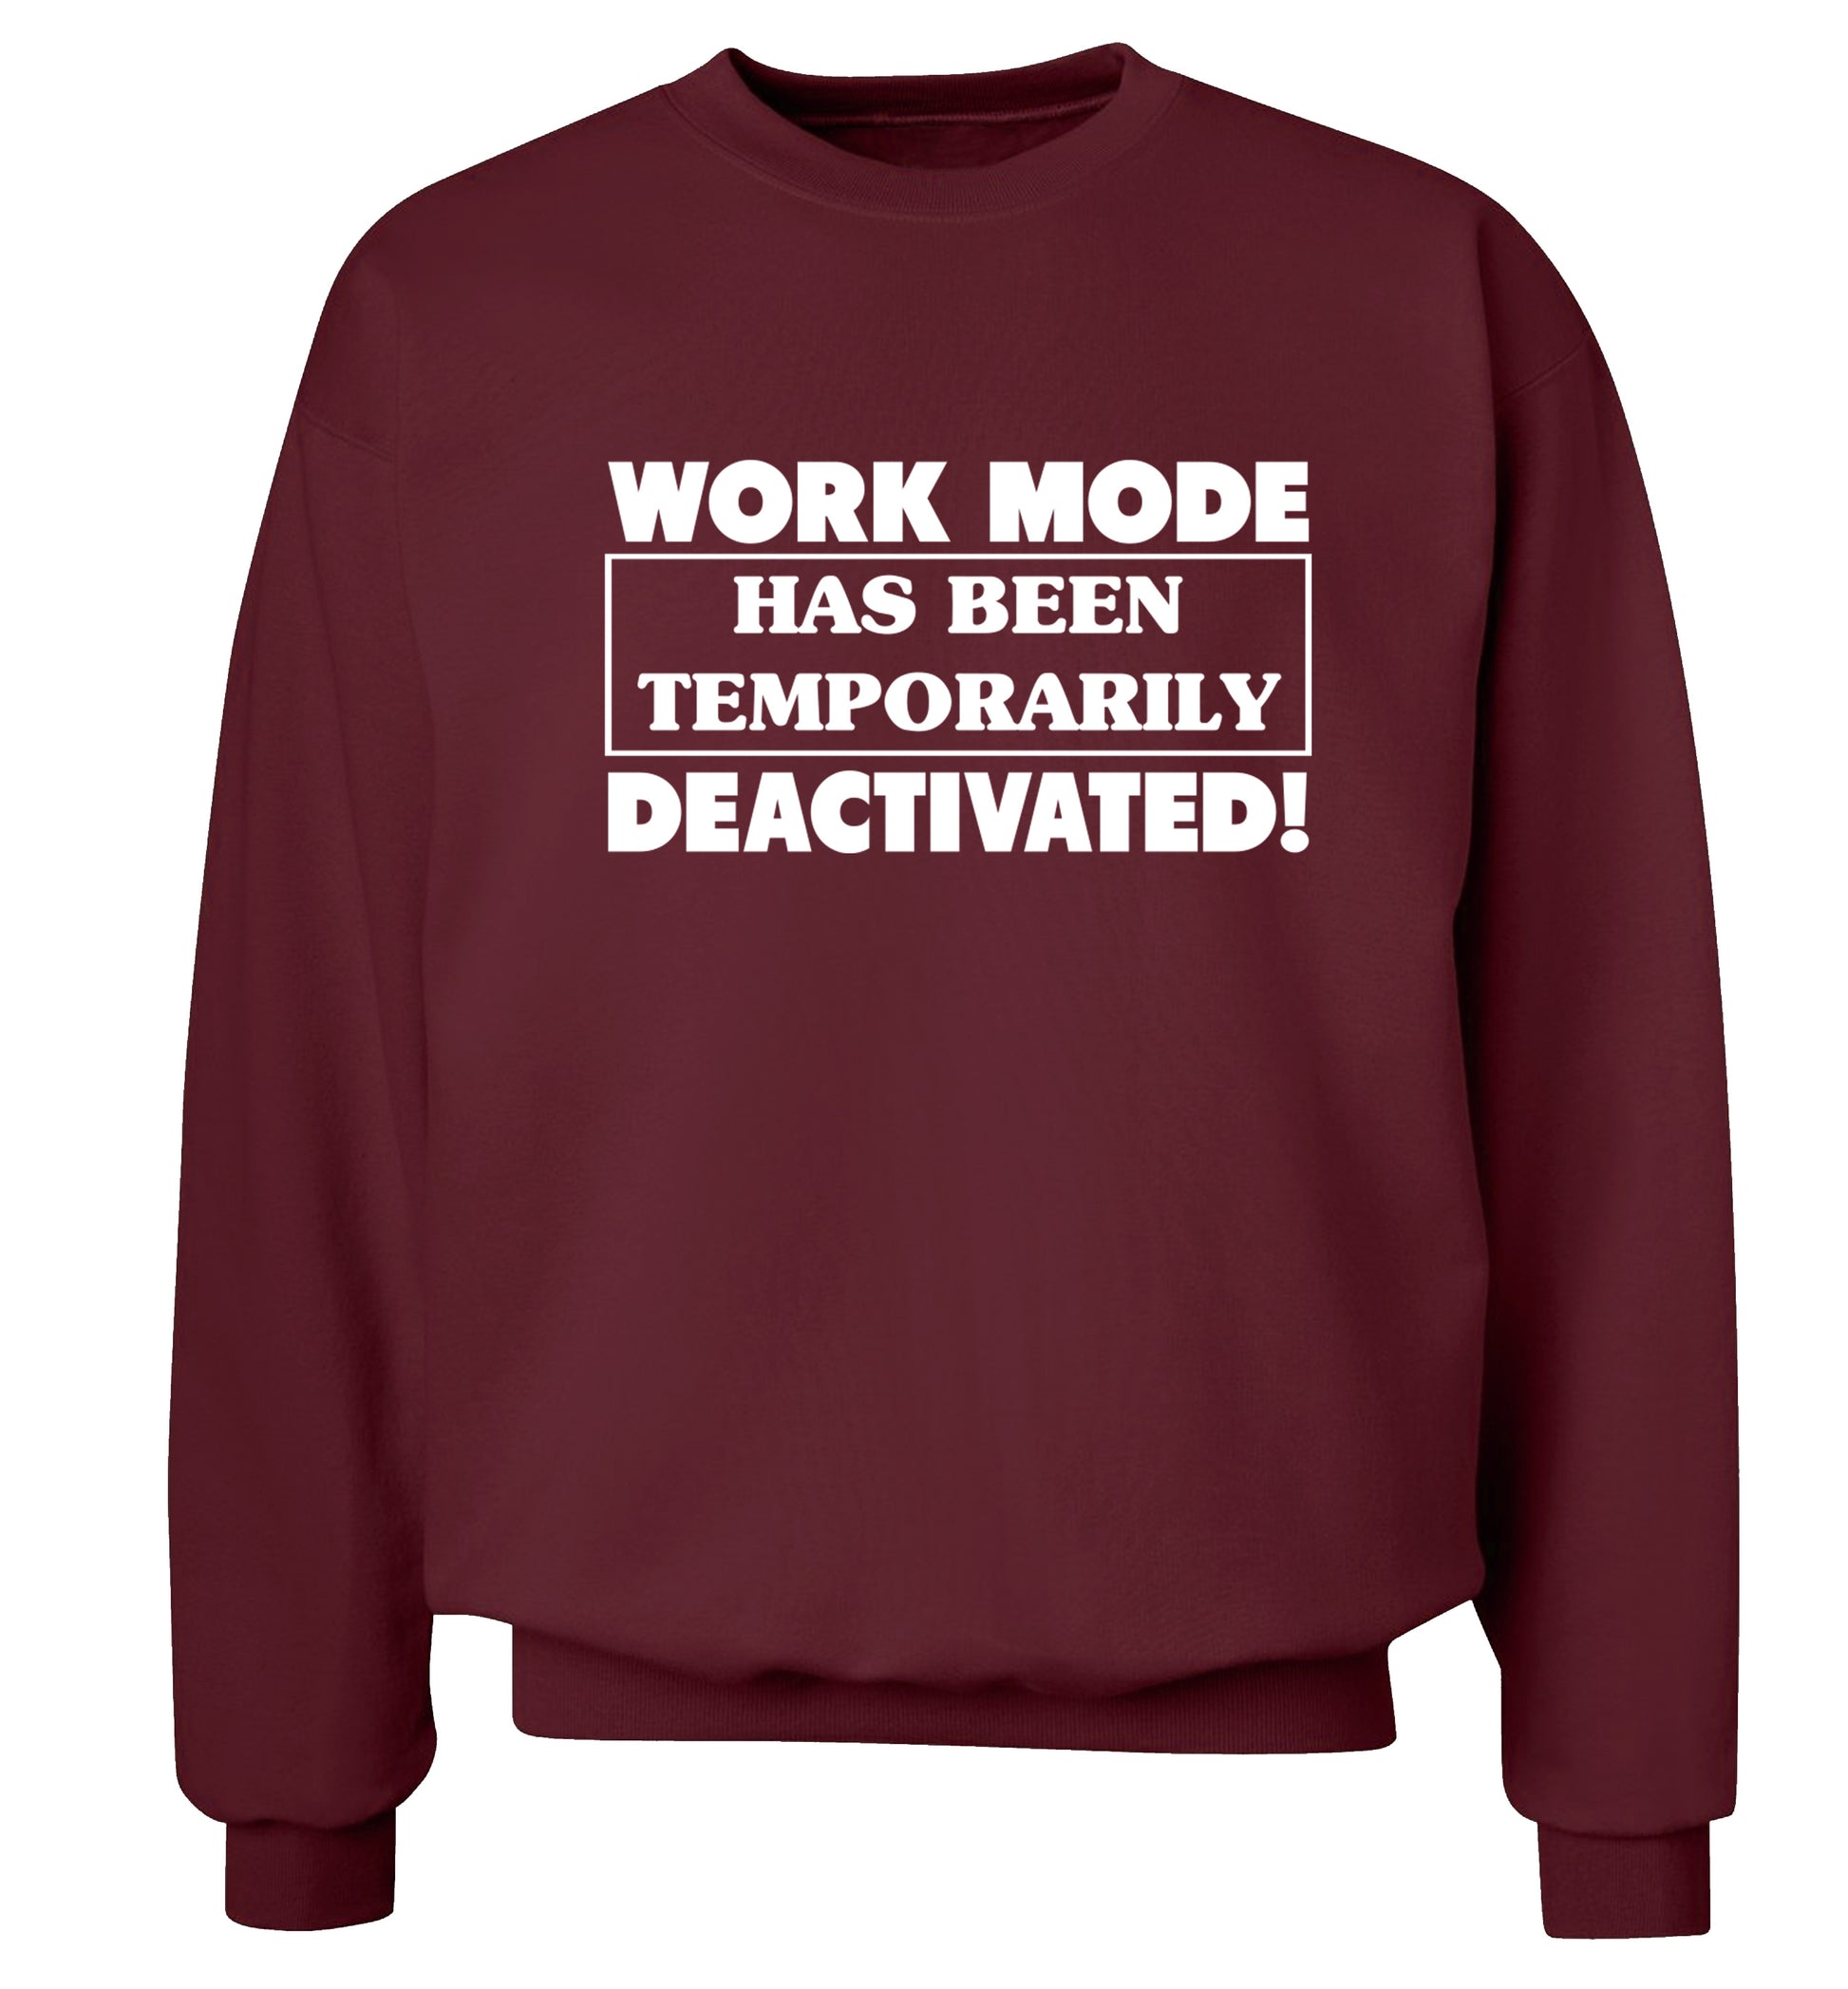 Work mode has now been temporarily deactivated Adult's unisex maroon Sweater 2XL